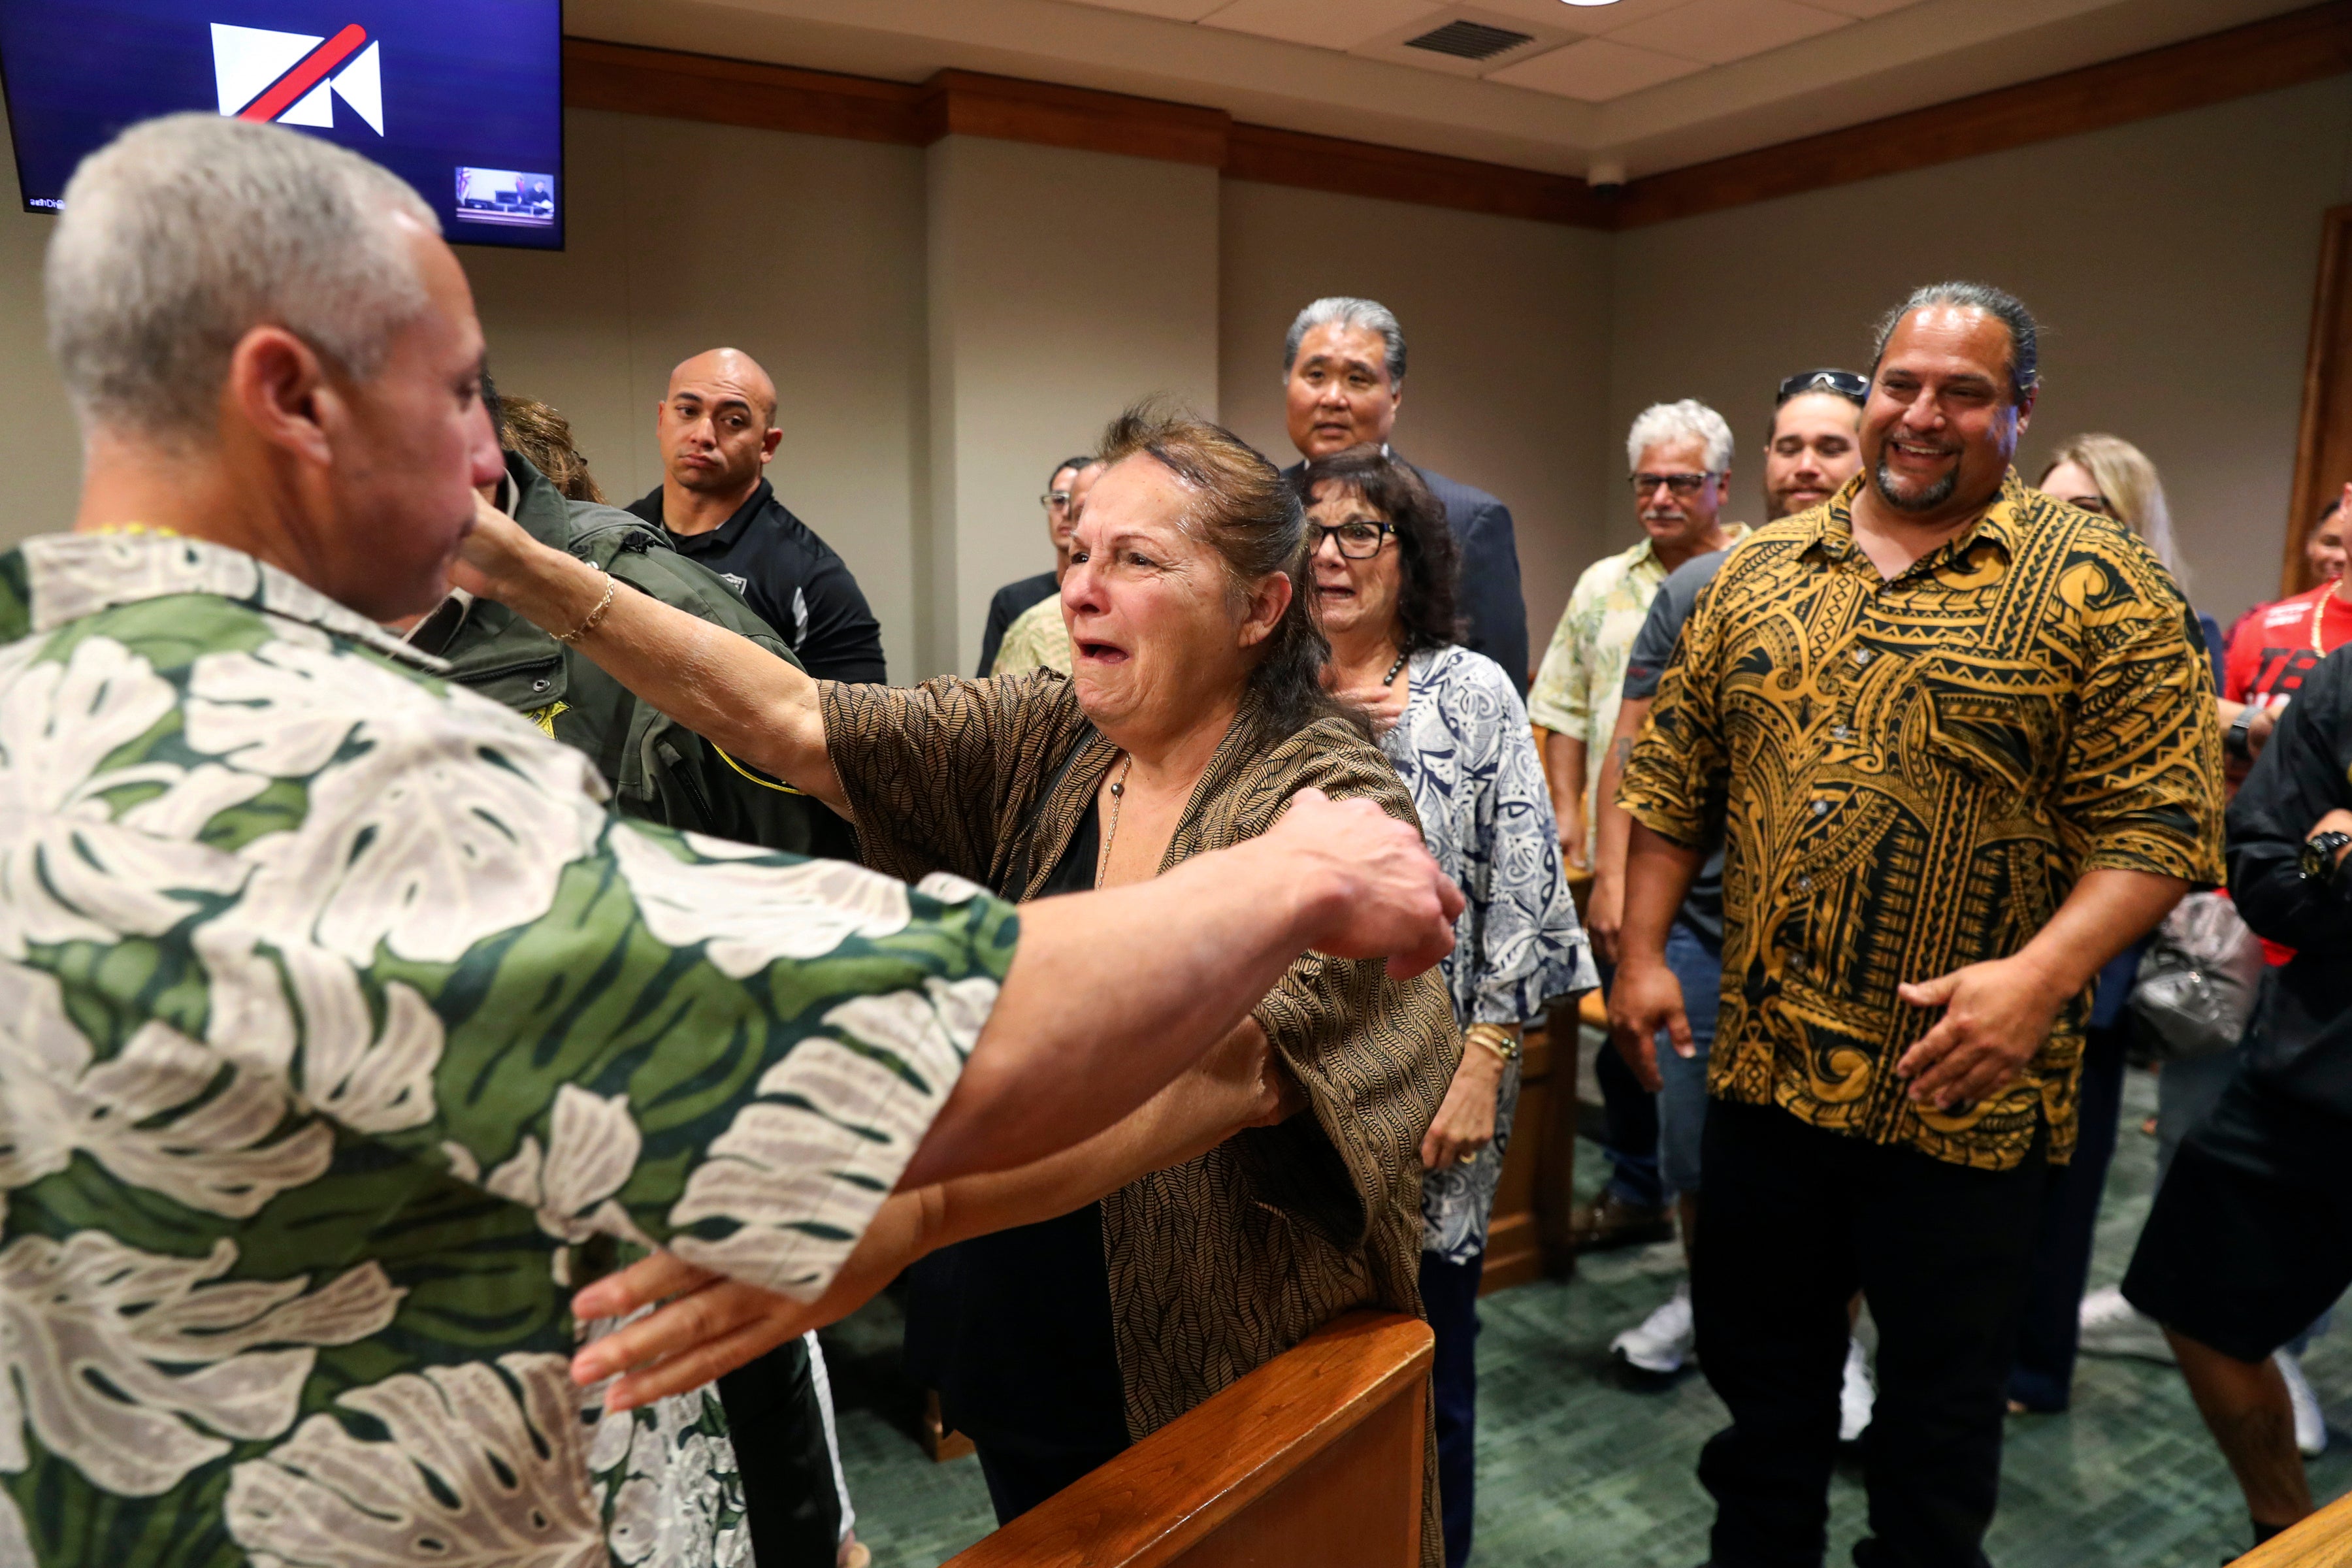 Freed after 20 years, Hawaii man reflects on case, future